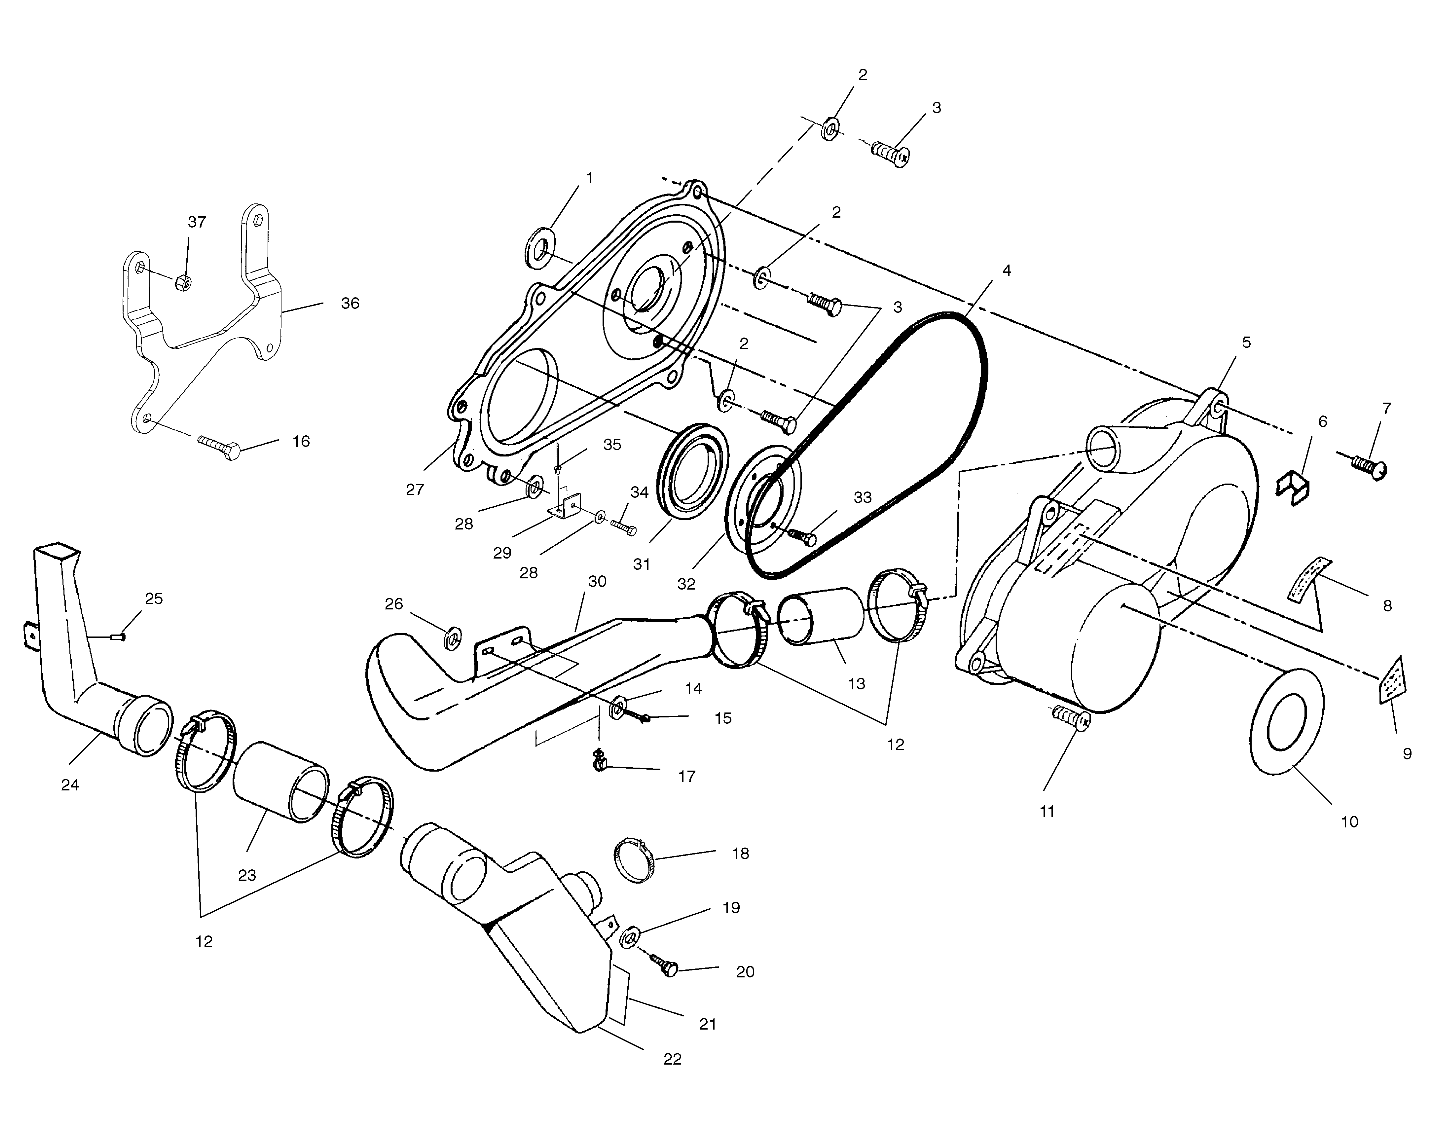 Part Number : 5433258 DUCT CLUTCH INLET